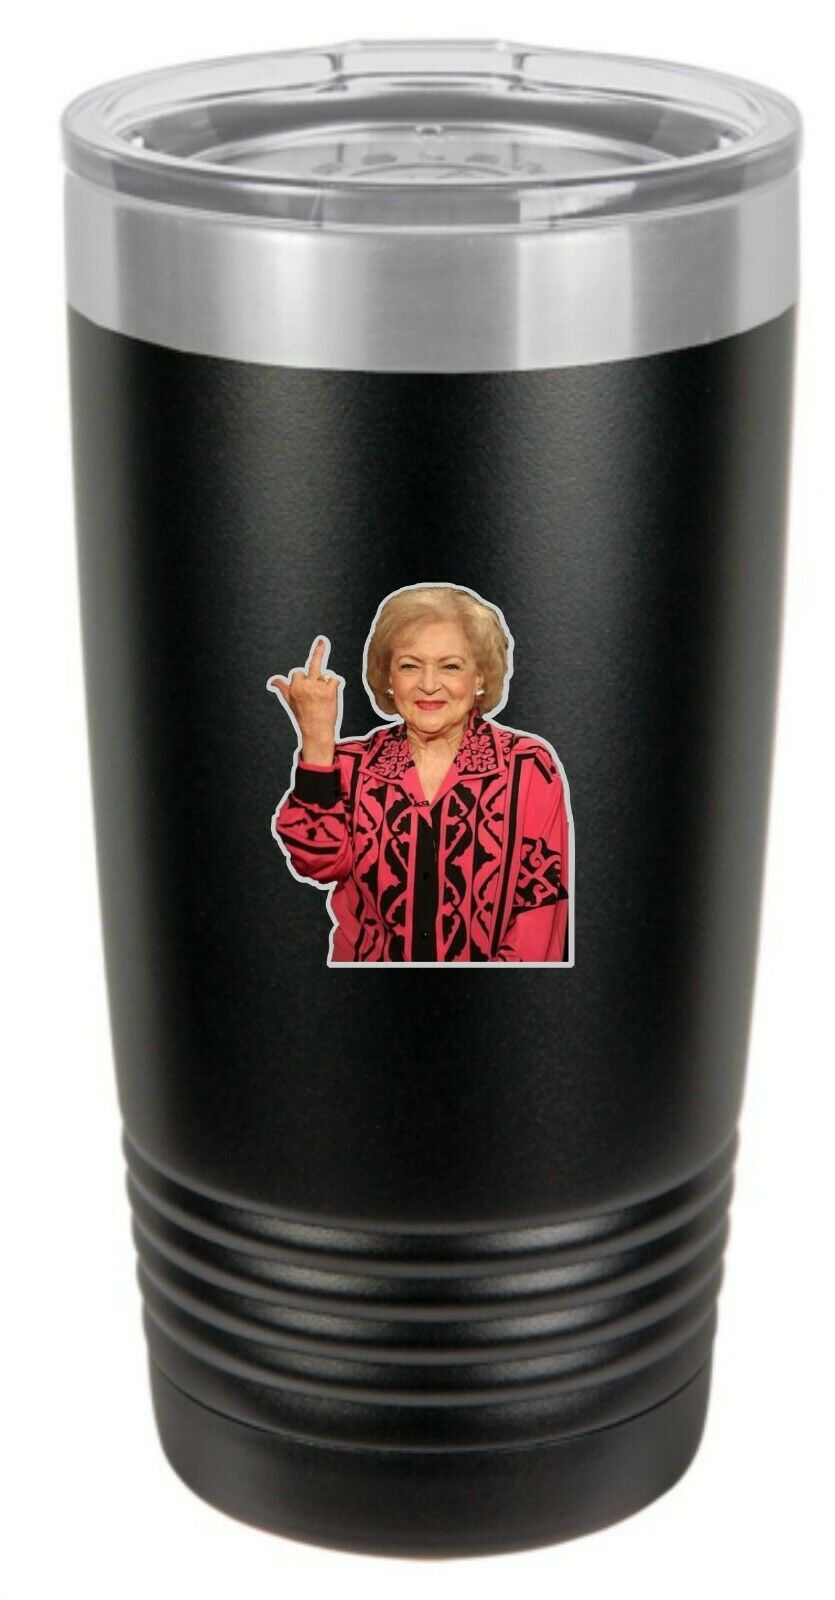 Betty White Middle Finger Decal(s) 5 Pack - Powercall Sirens LLC